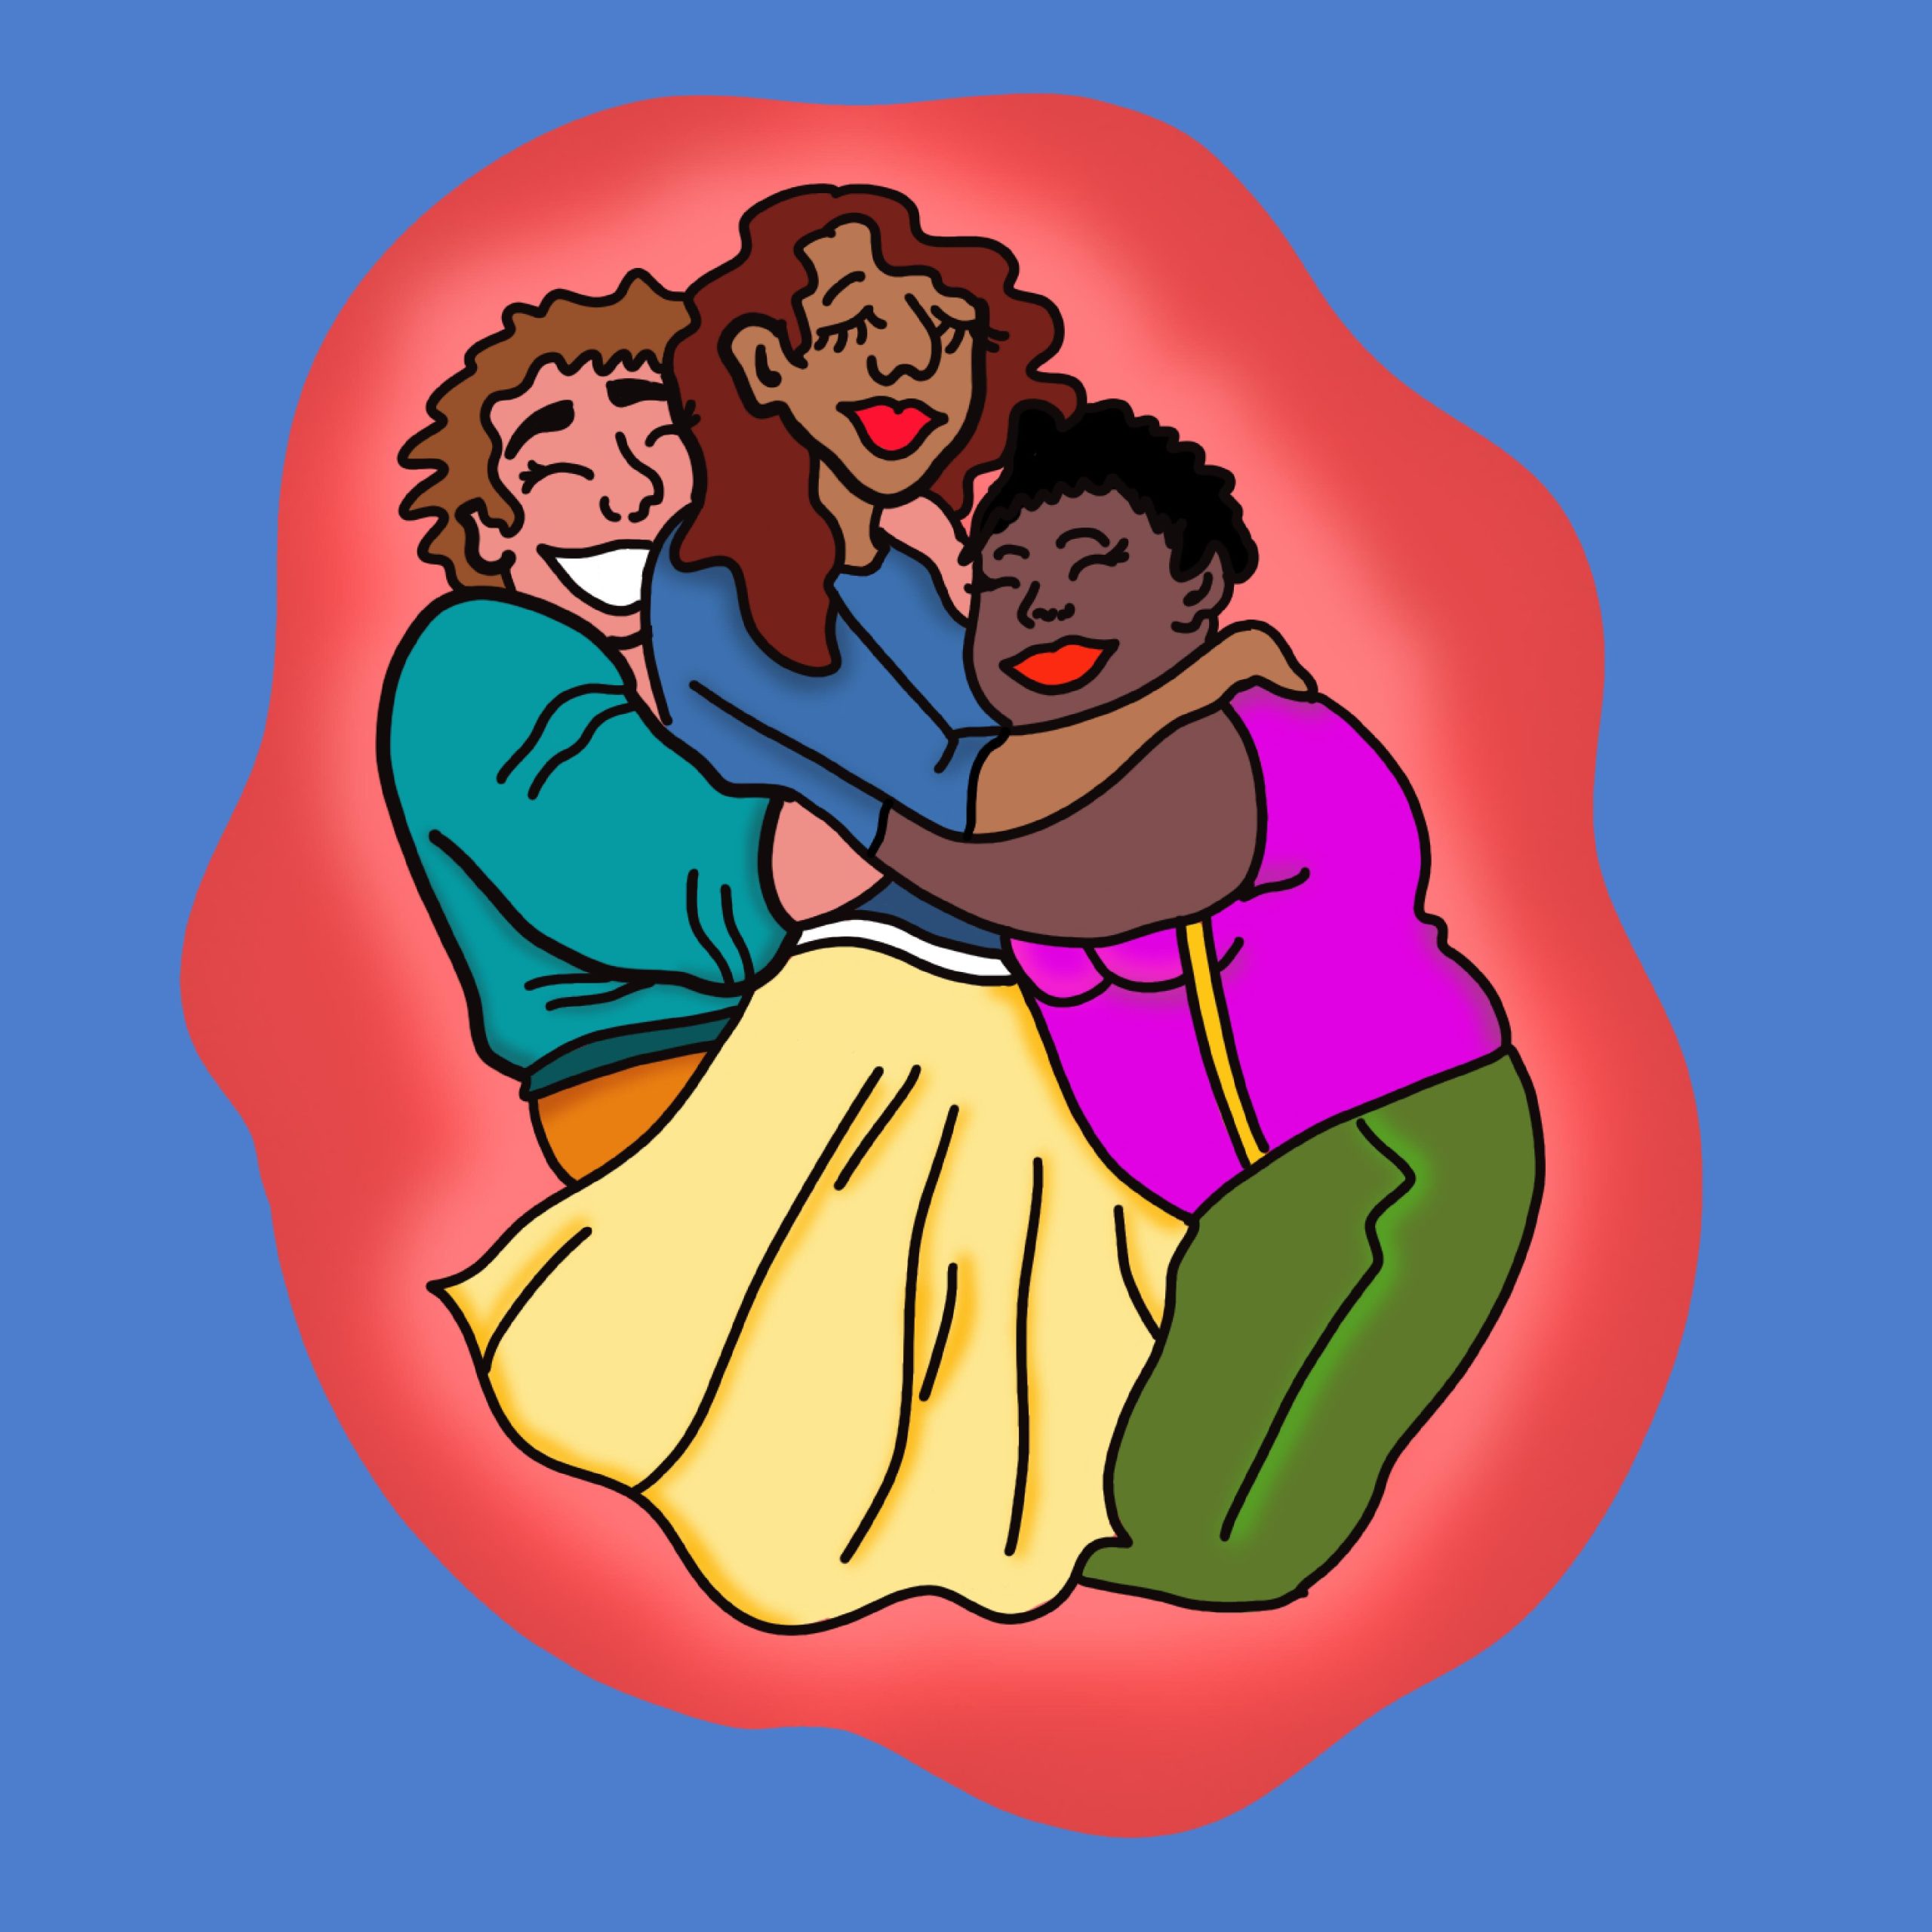 Three gender-diverse people dressed in colourful clothing share a warm and joyful hug.